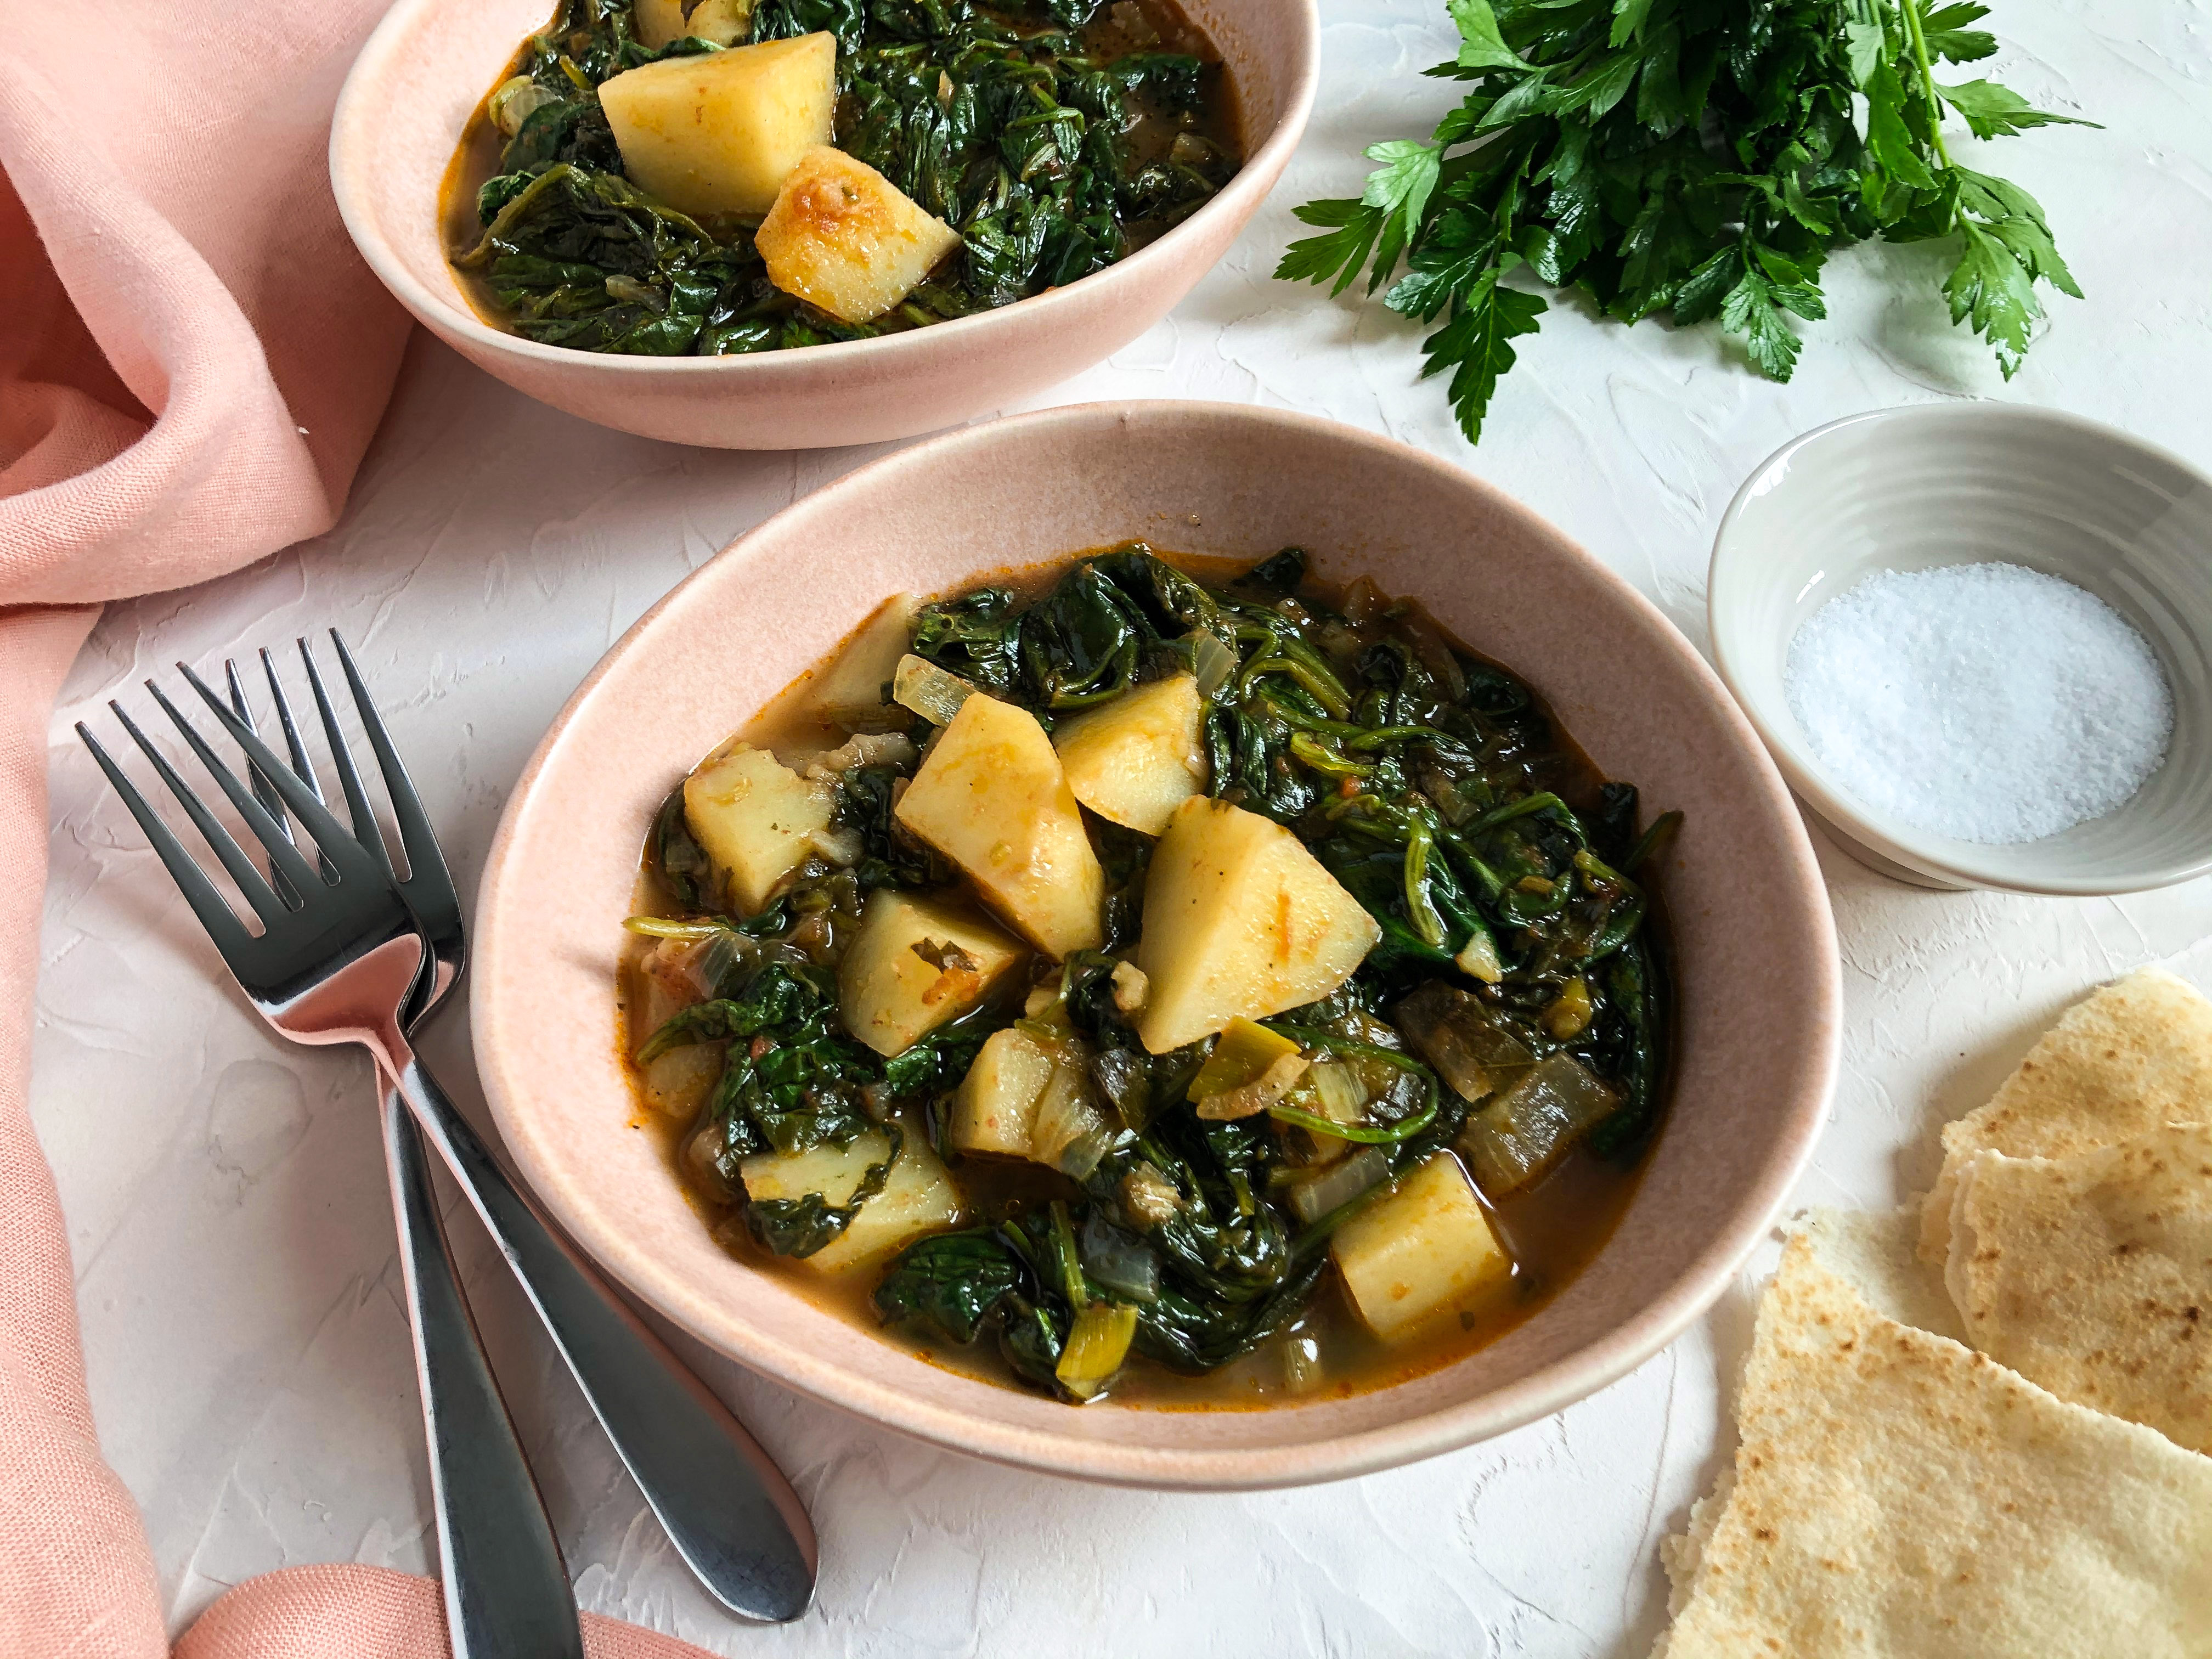 Spinach and potato stew (Σπανάκι με πατάτες)